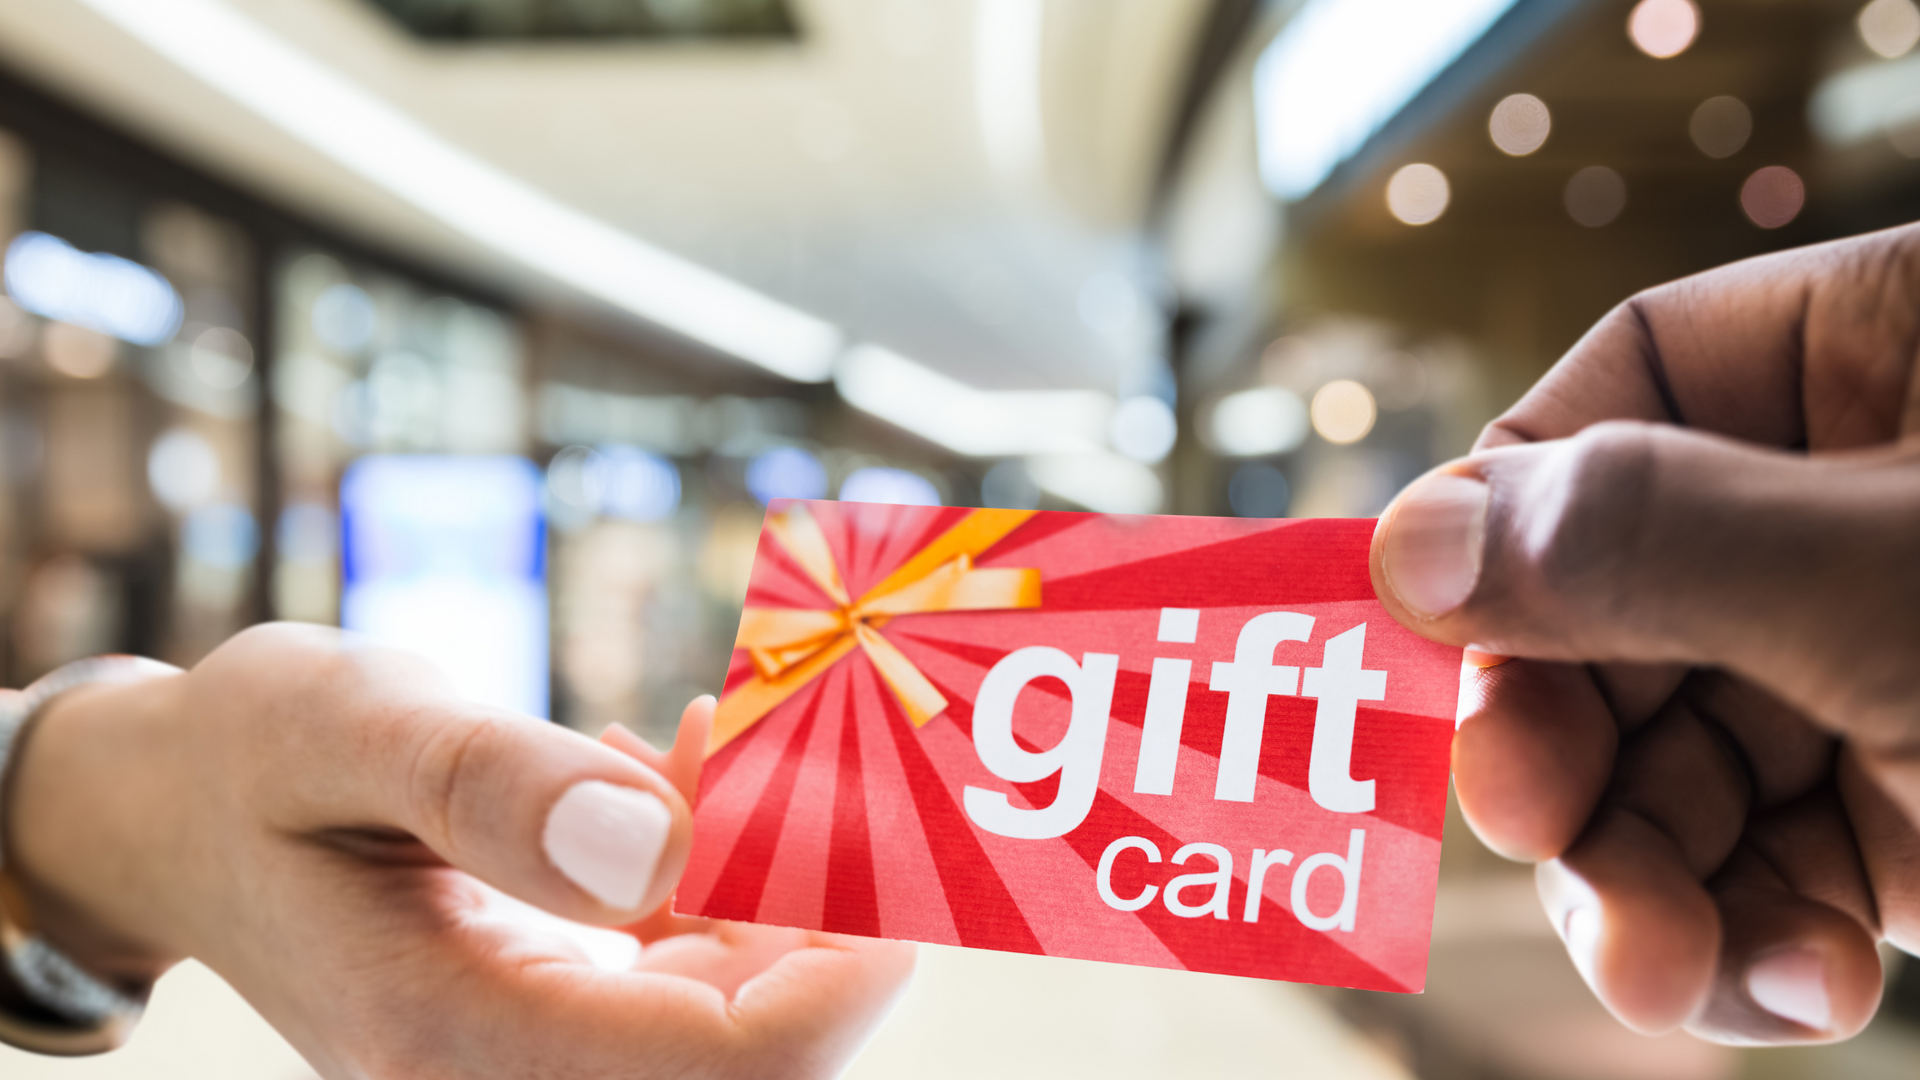 a person is handing a gift card to another person